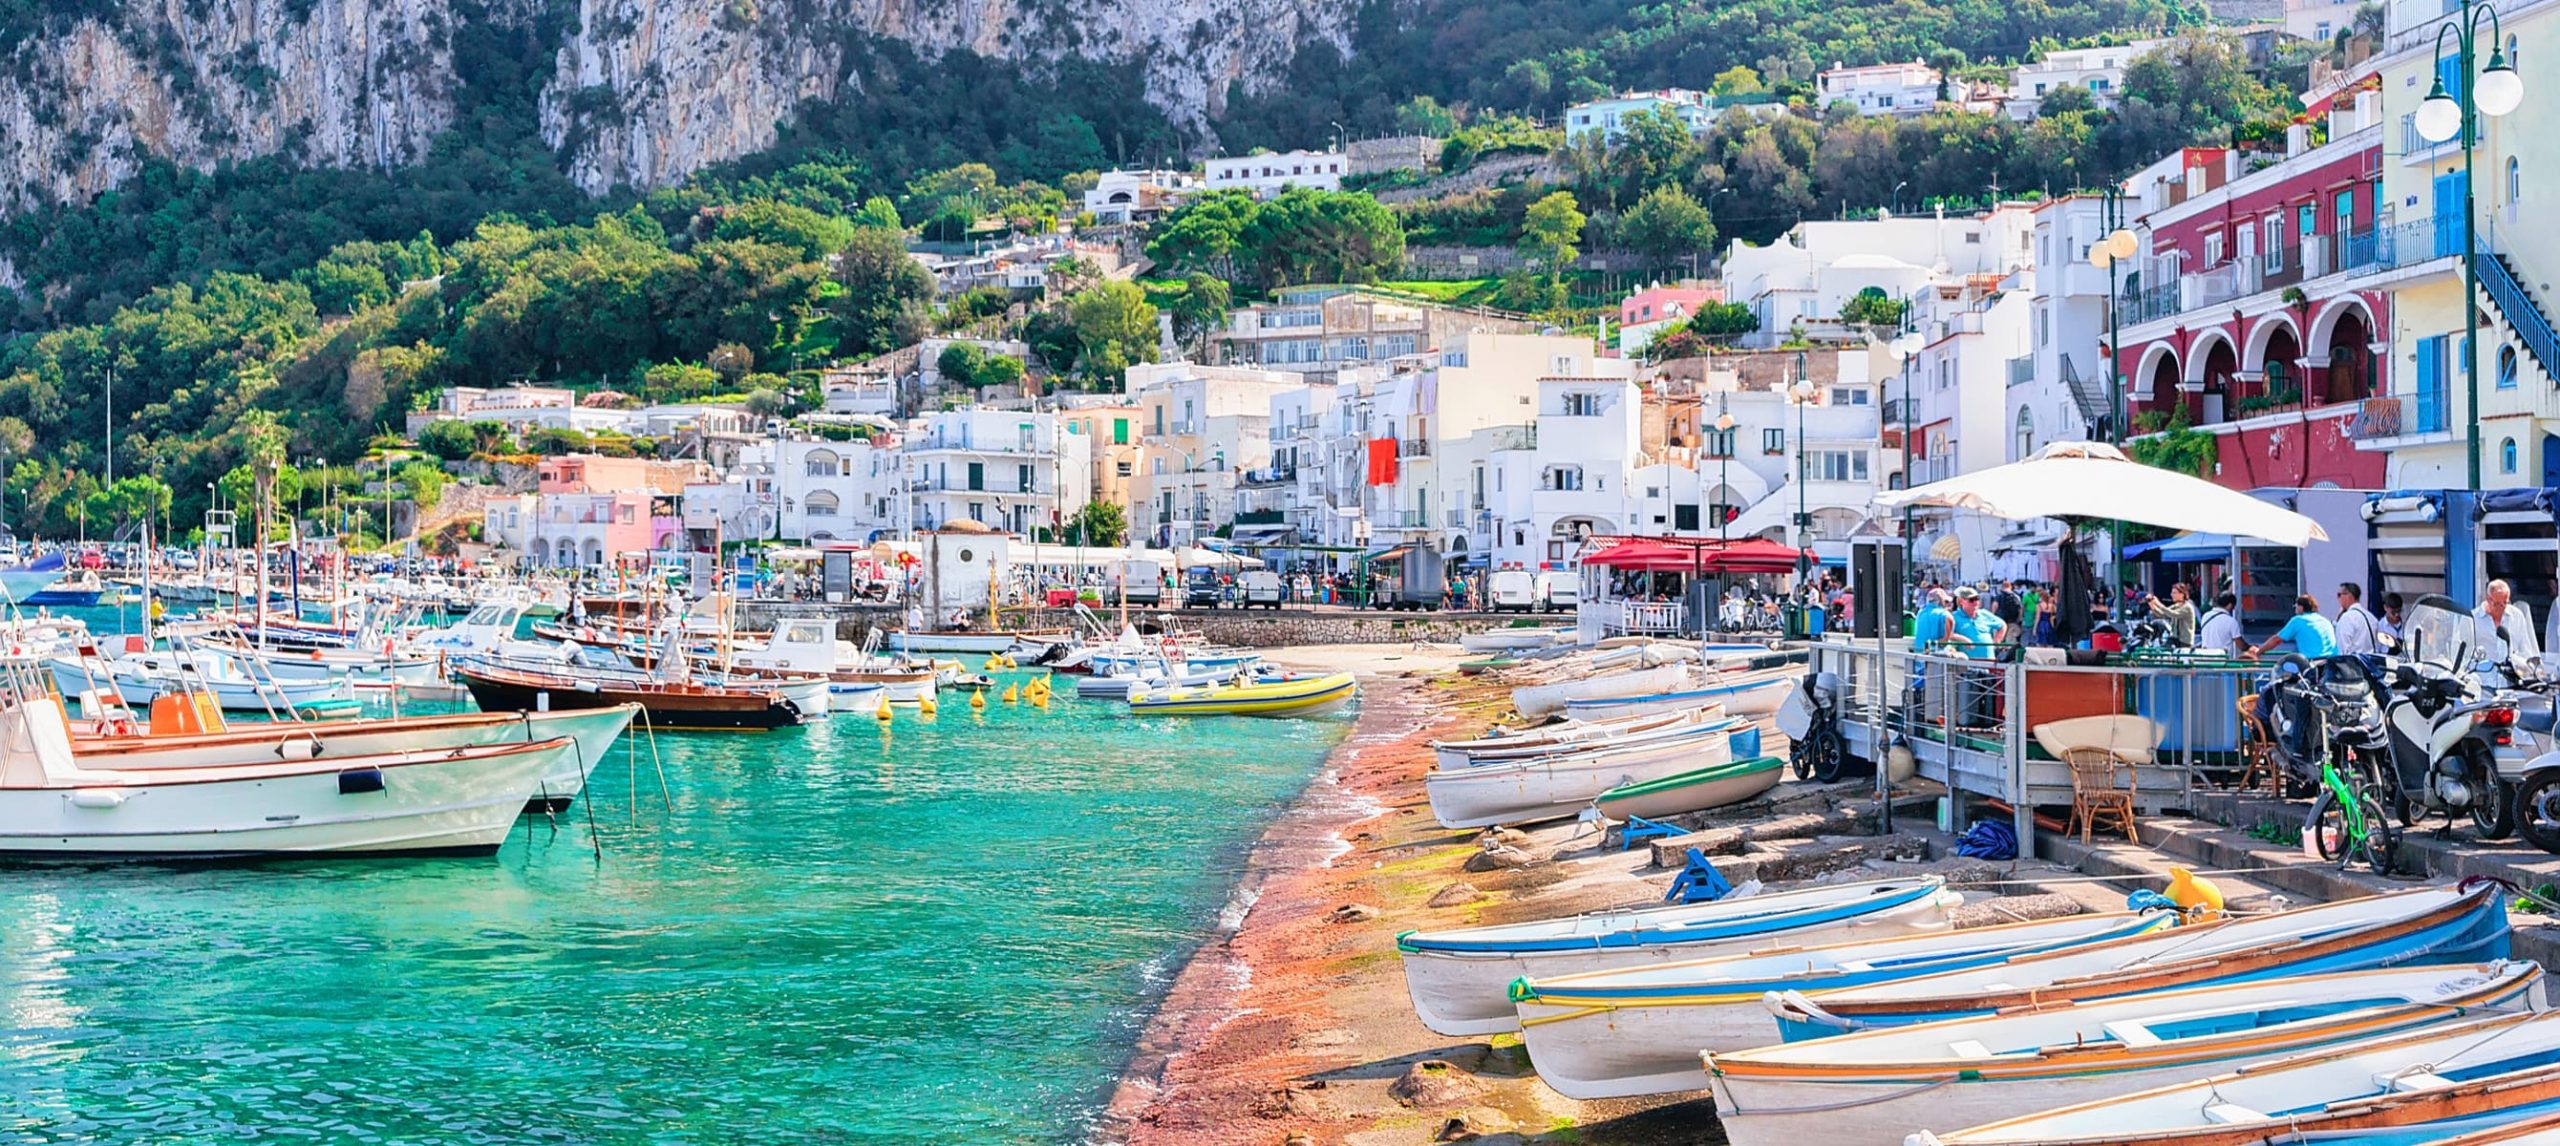 The Best Things To Do In Capri, Italy